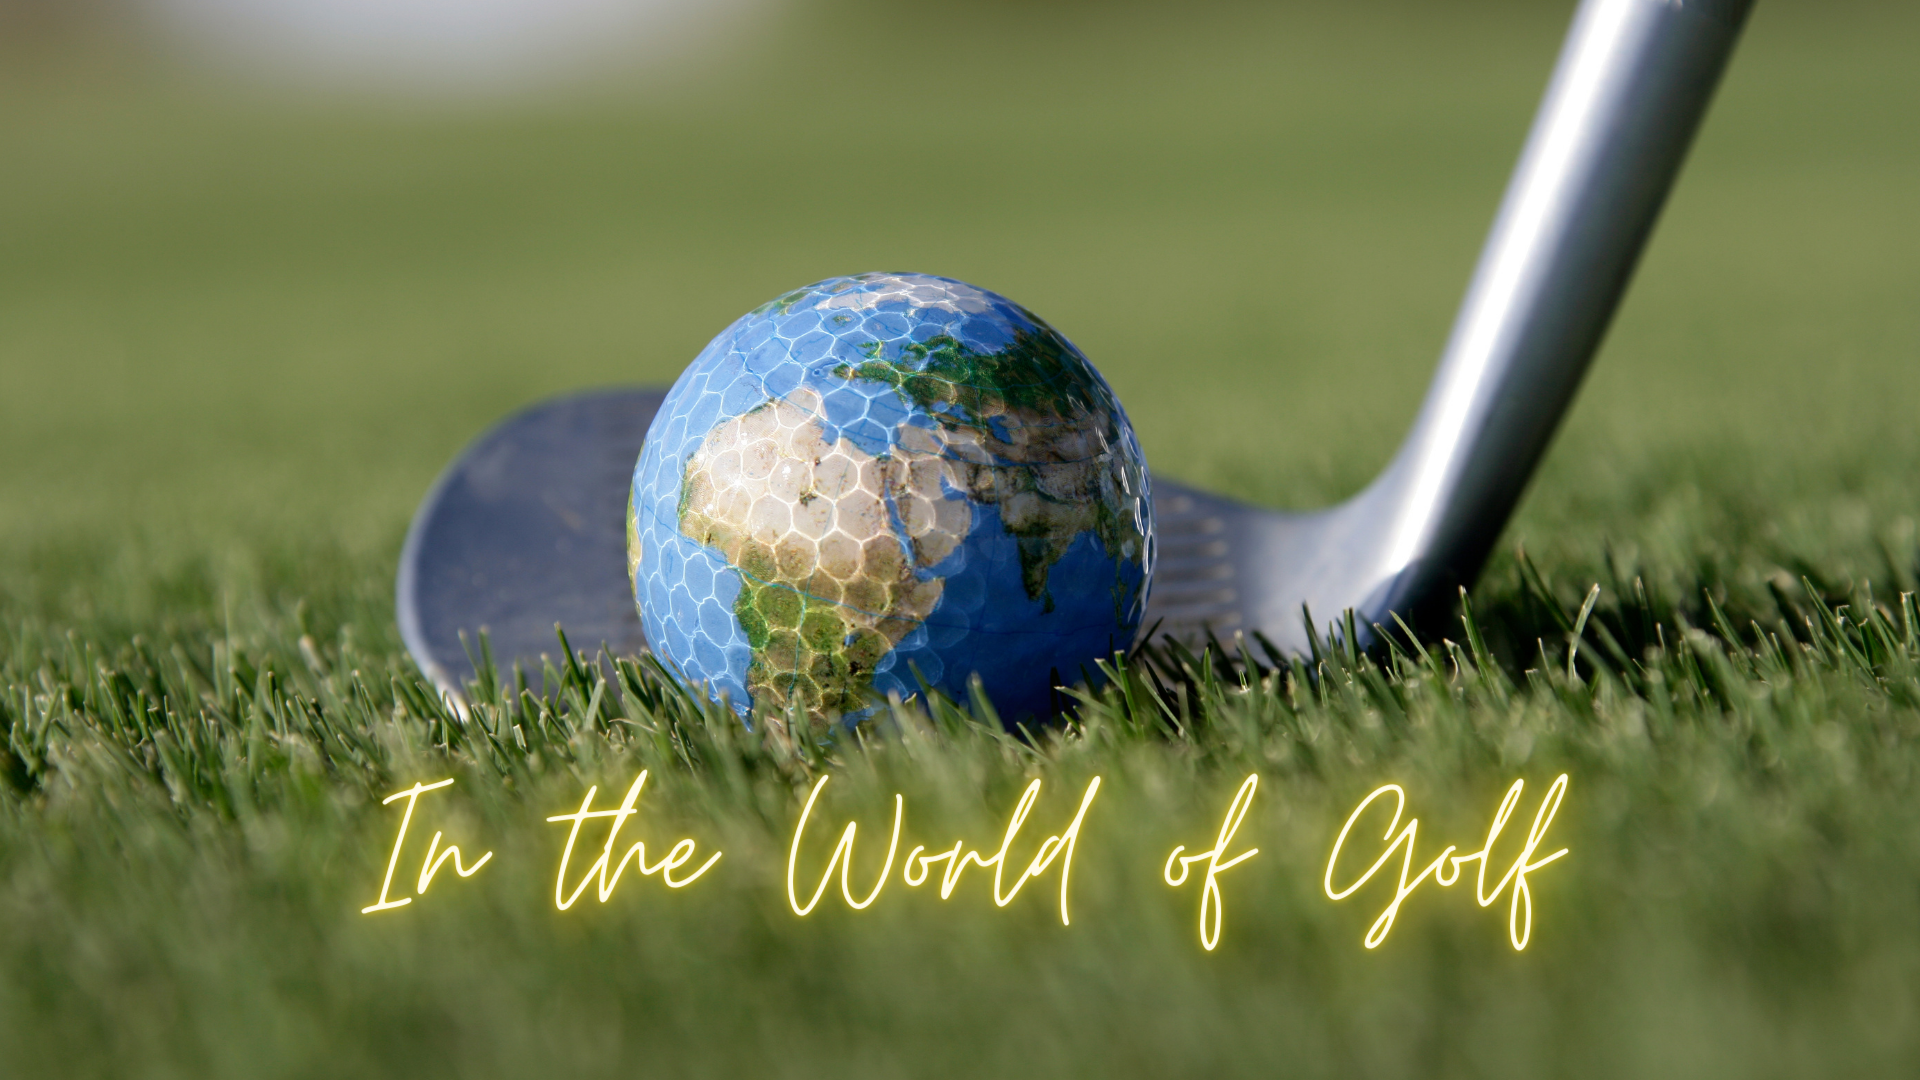 World of Golf this Week